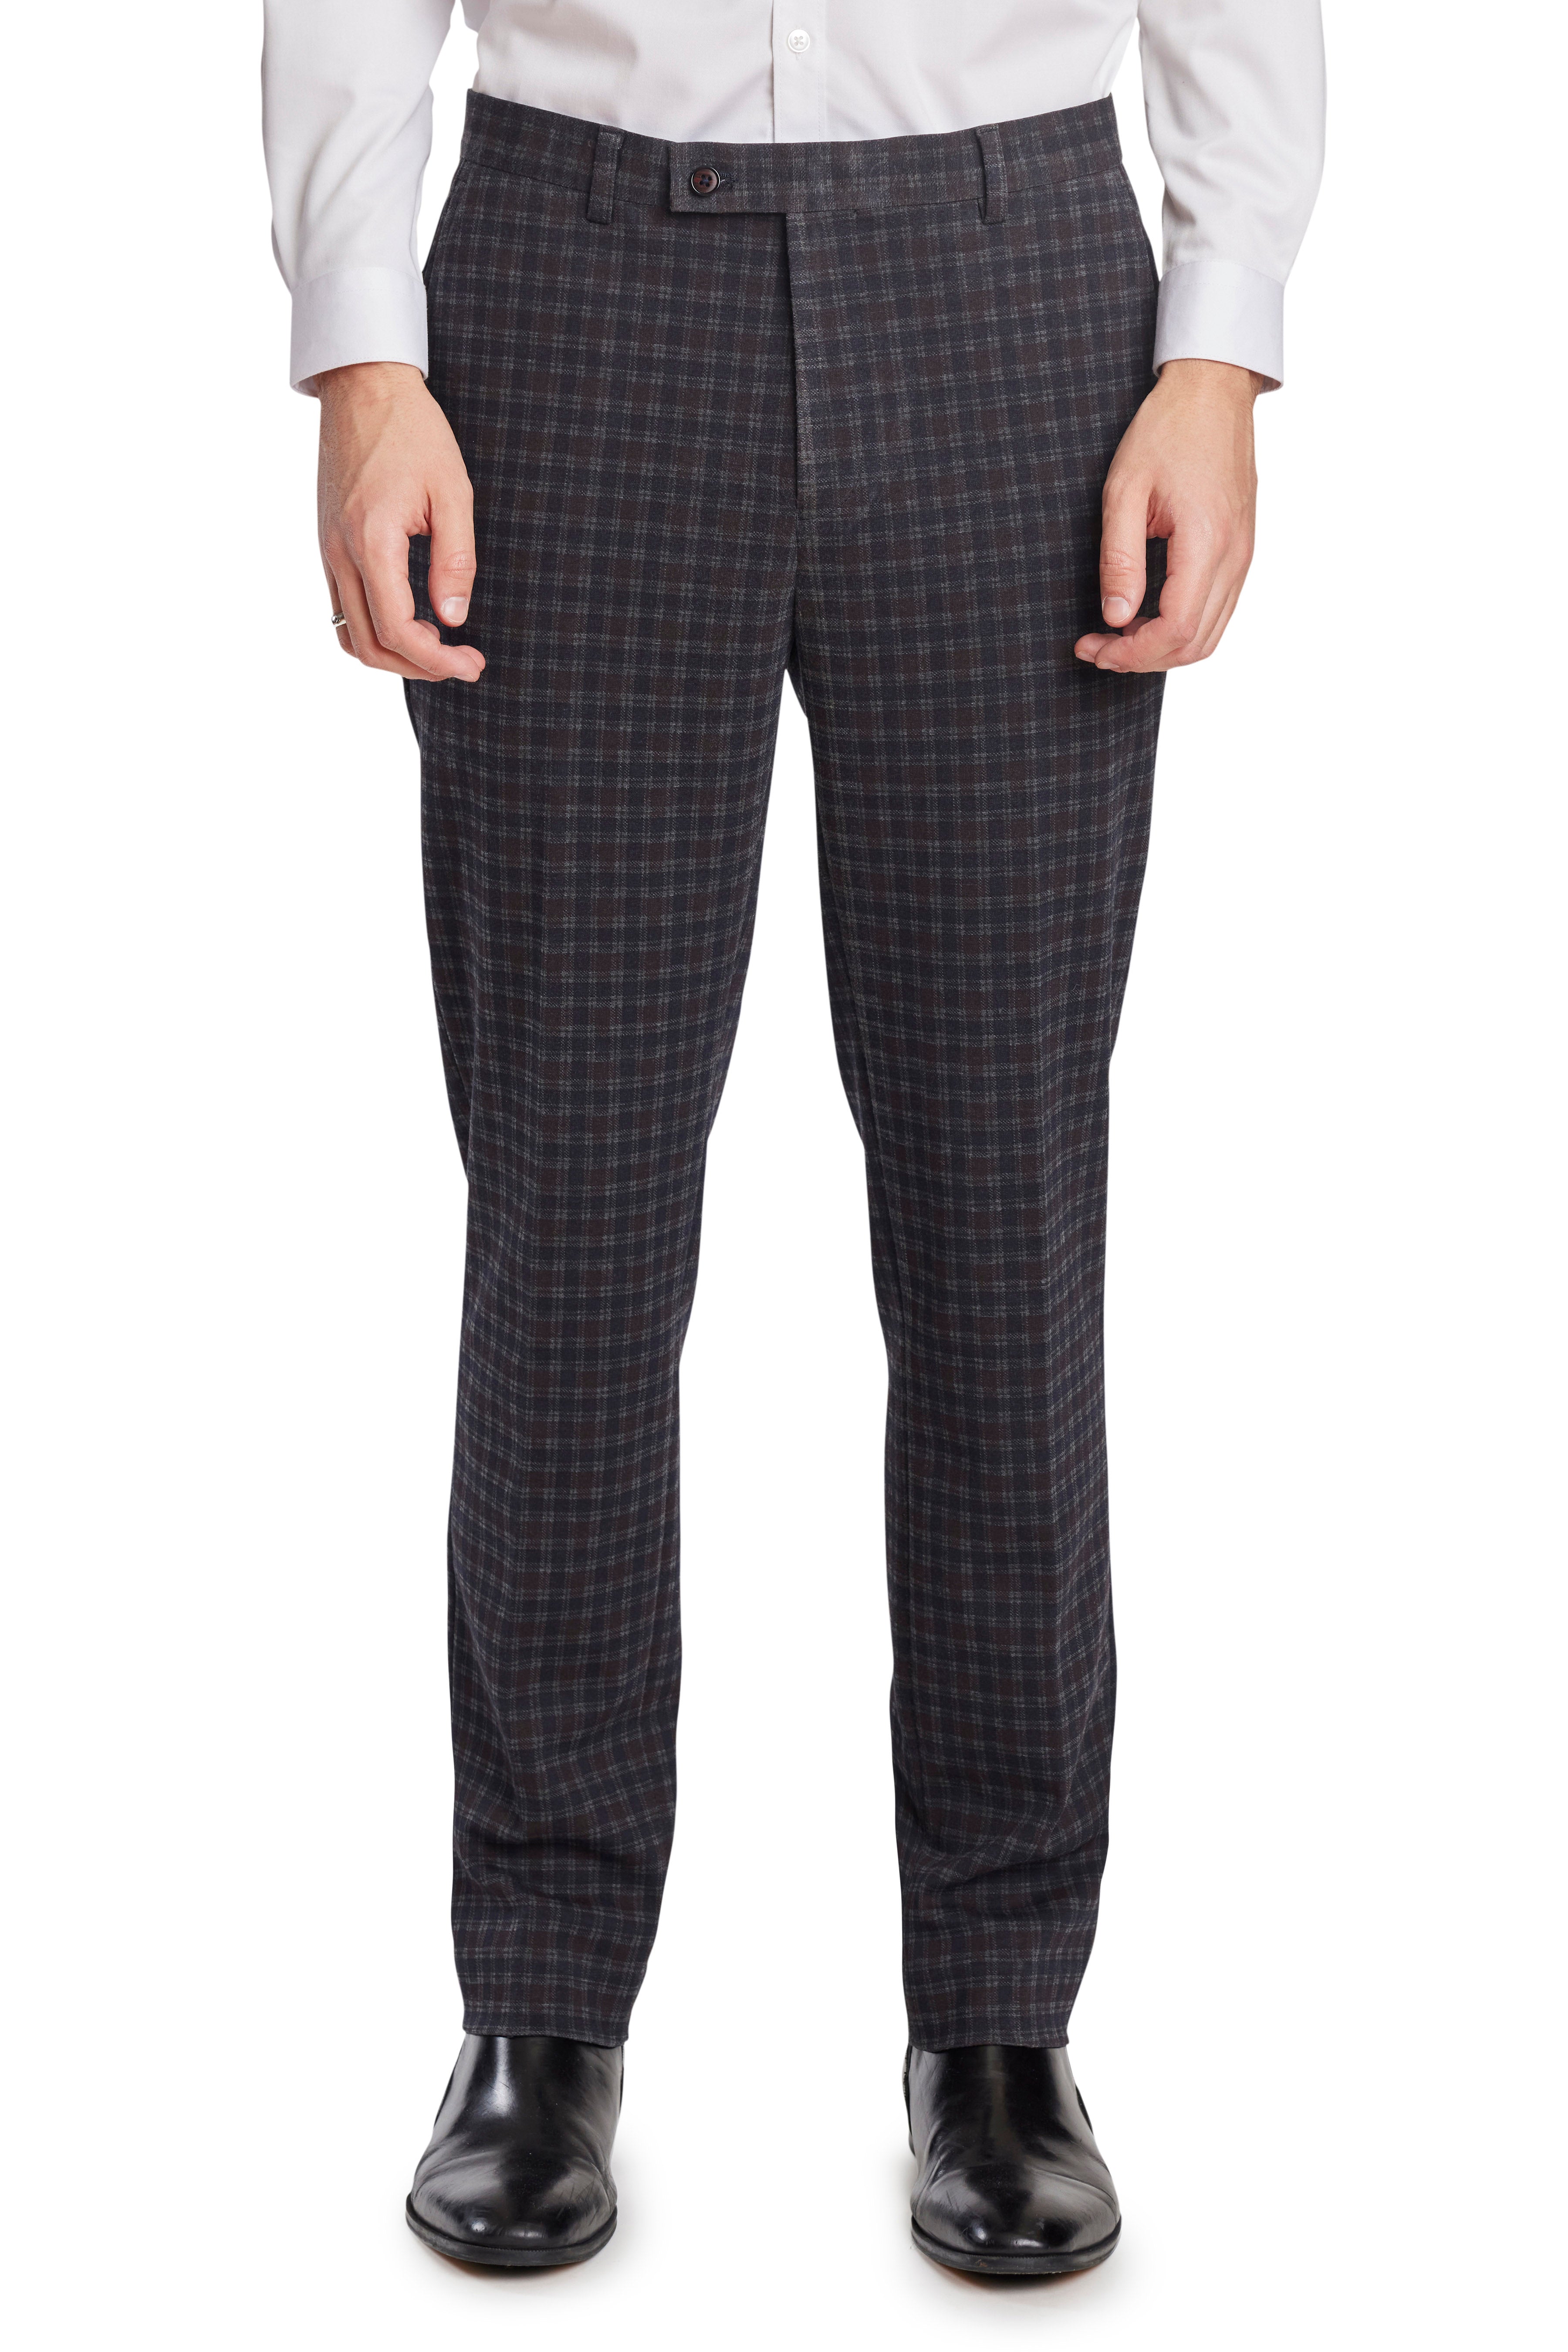 Downing Pants - slim - Wine Navy Little Check